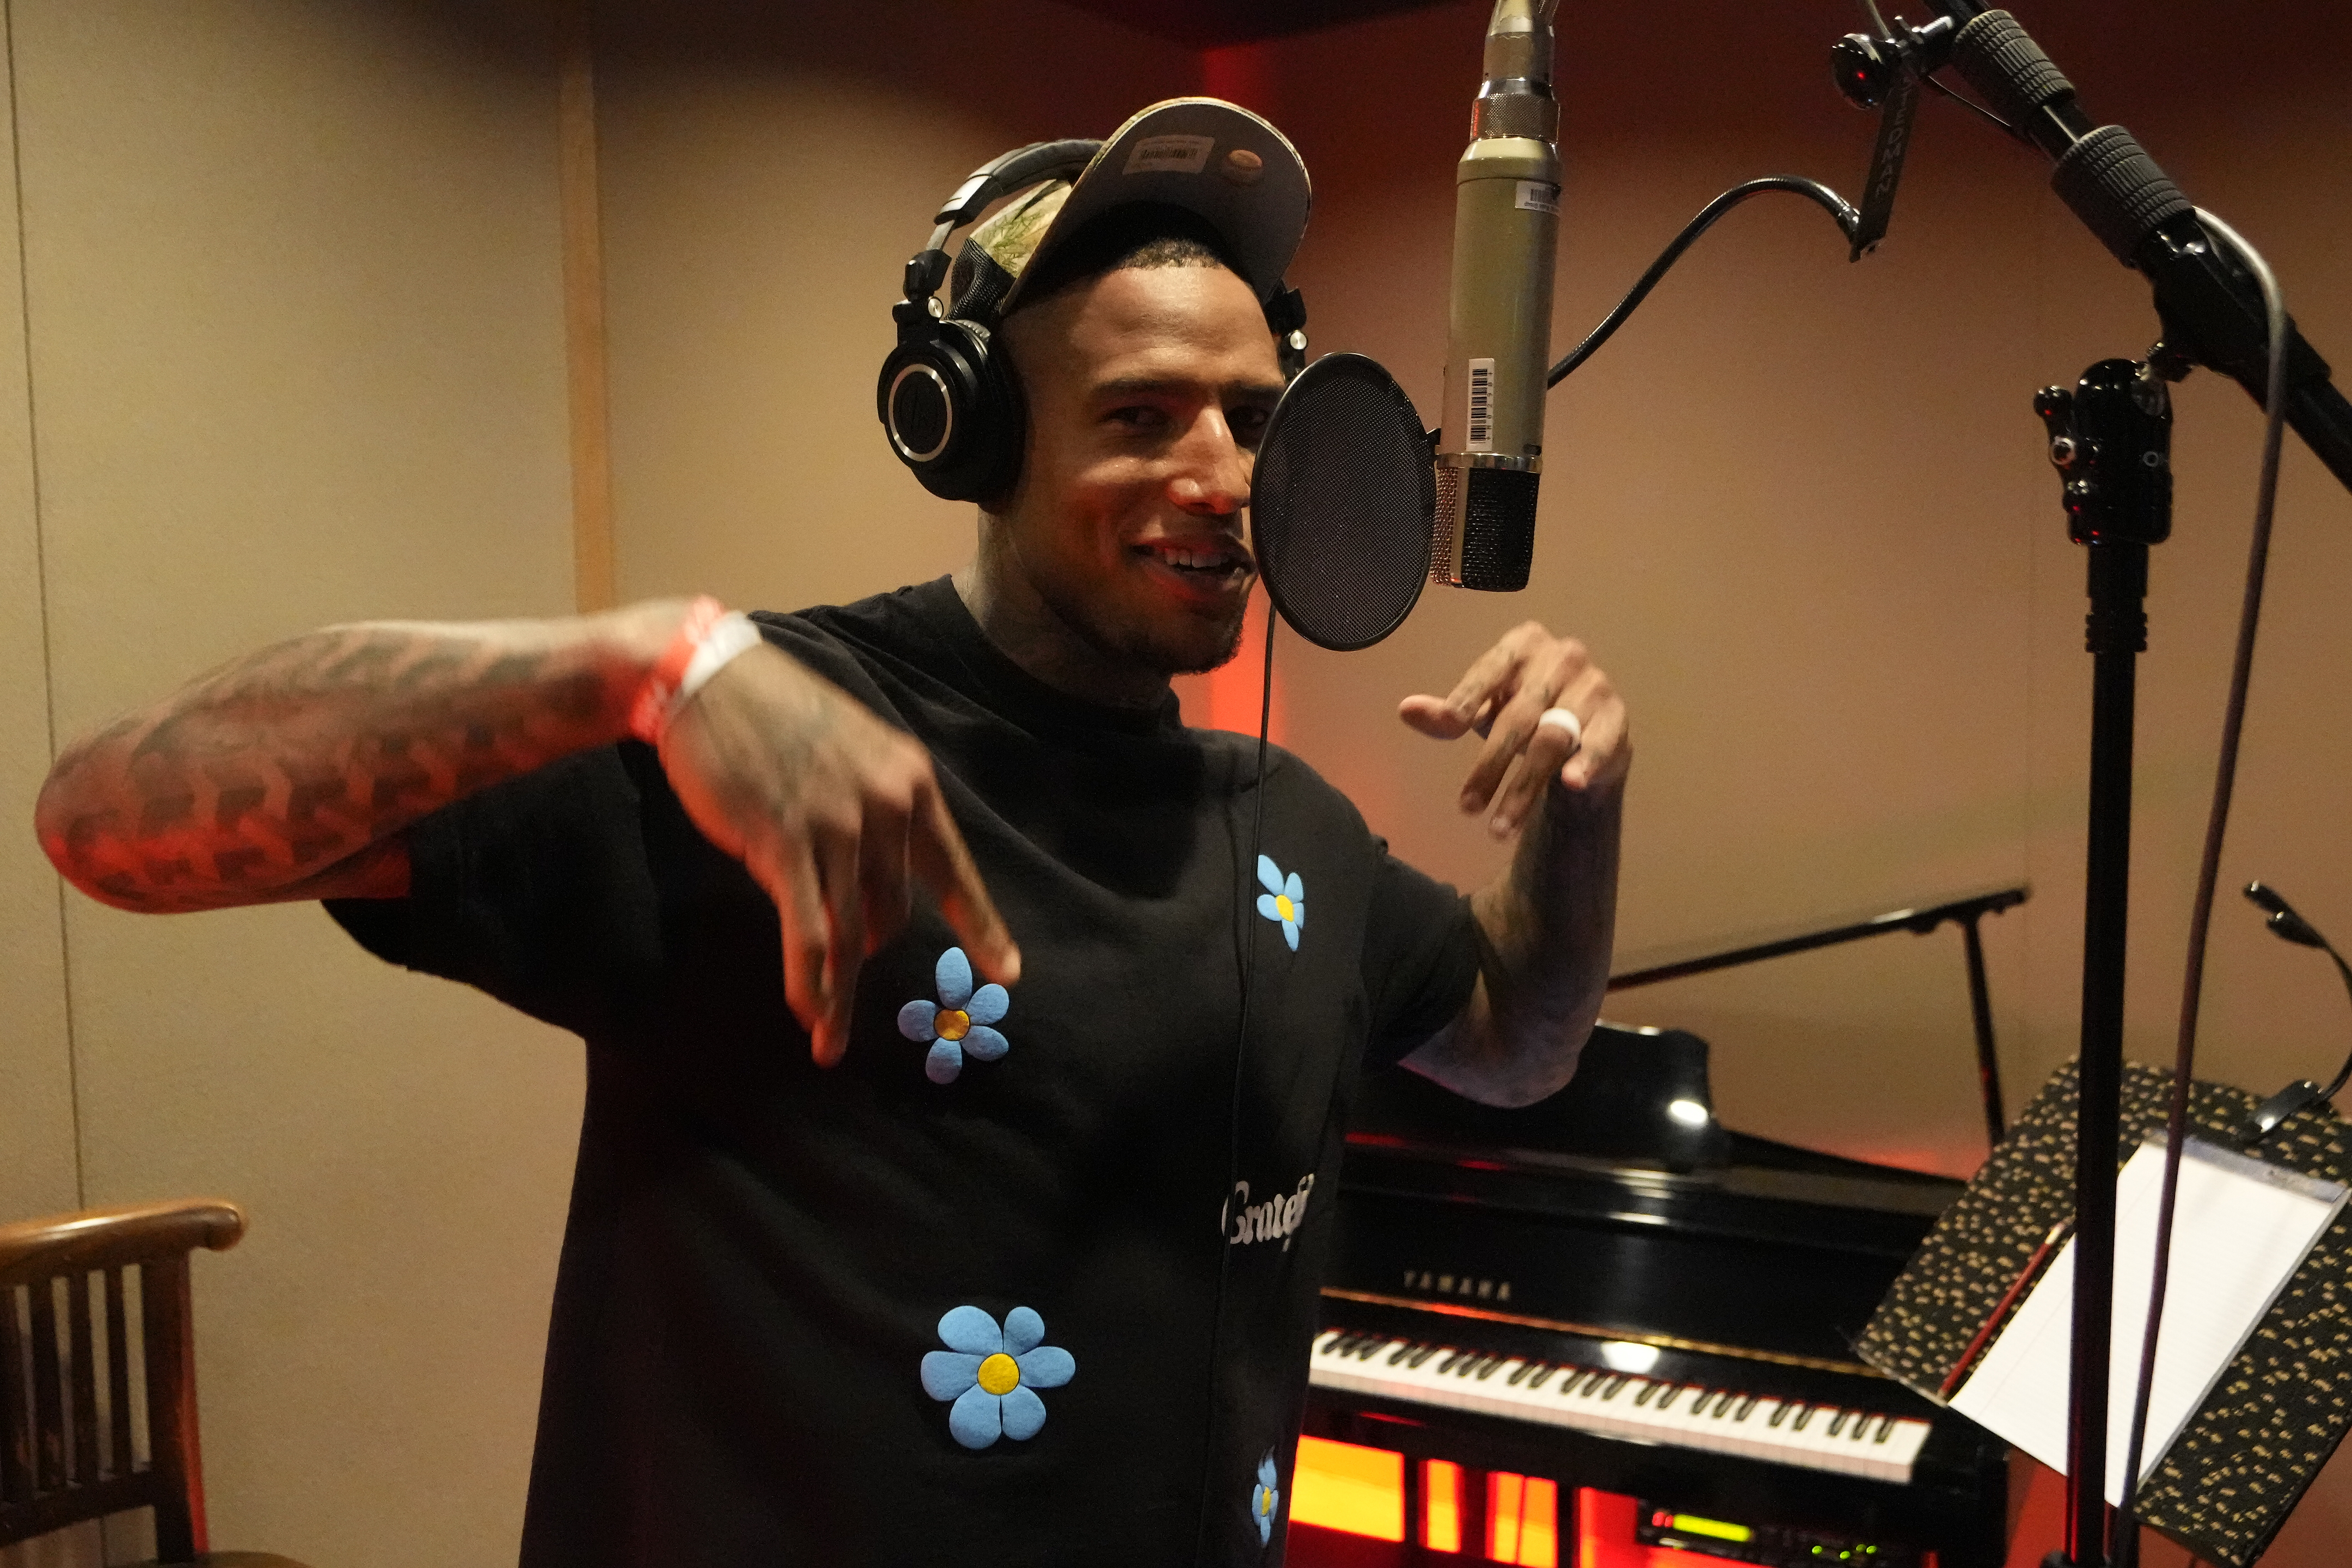 NFL players follow musical passion to create songs featured on Madden 24  video game